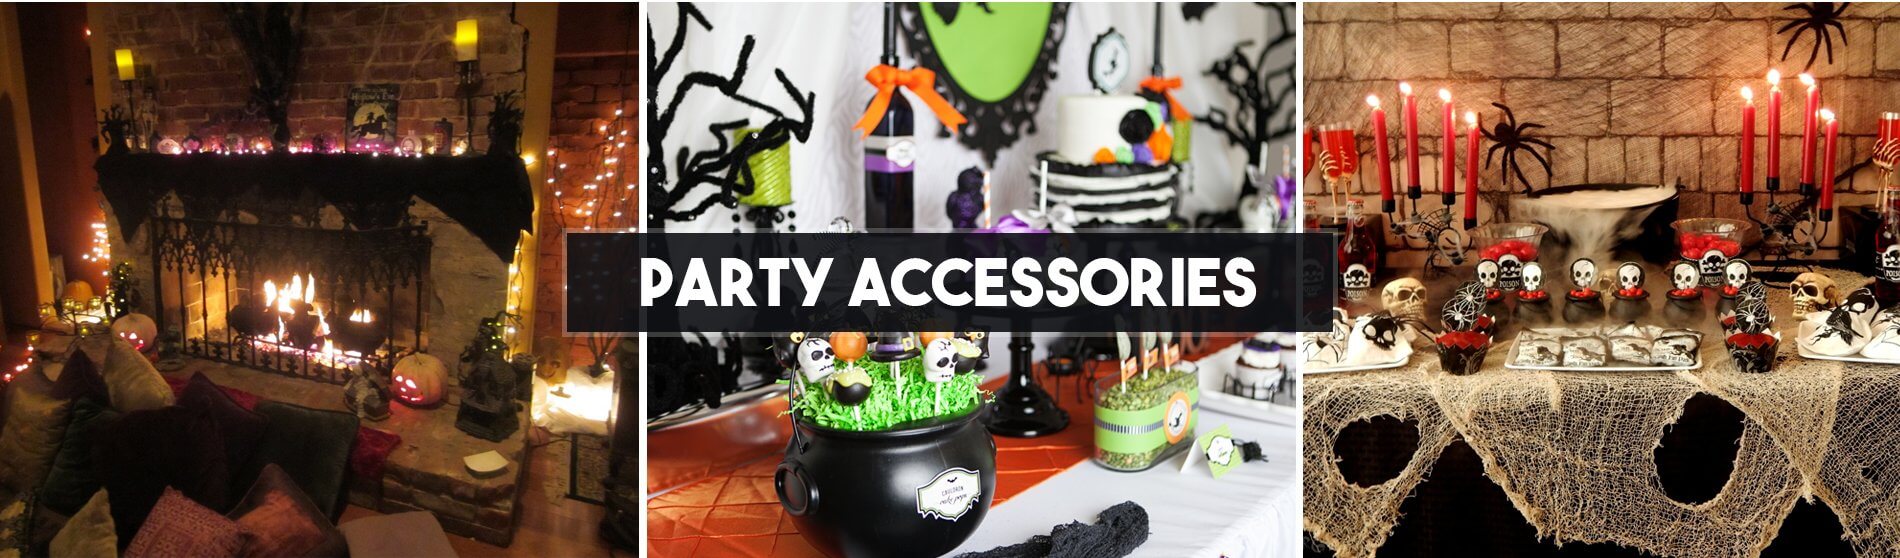 Glendale Halloween : Party-Accessories